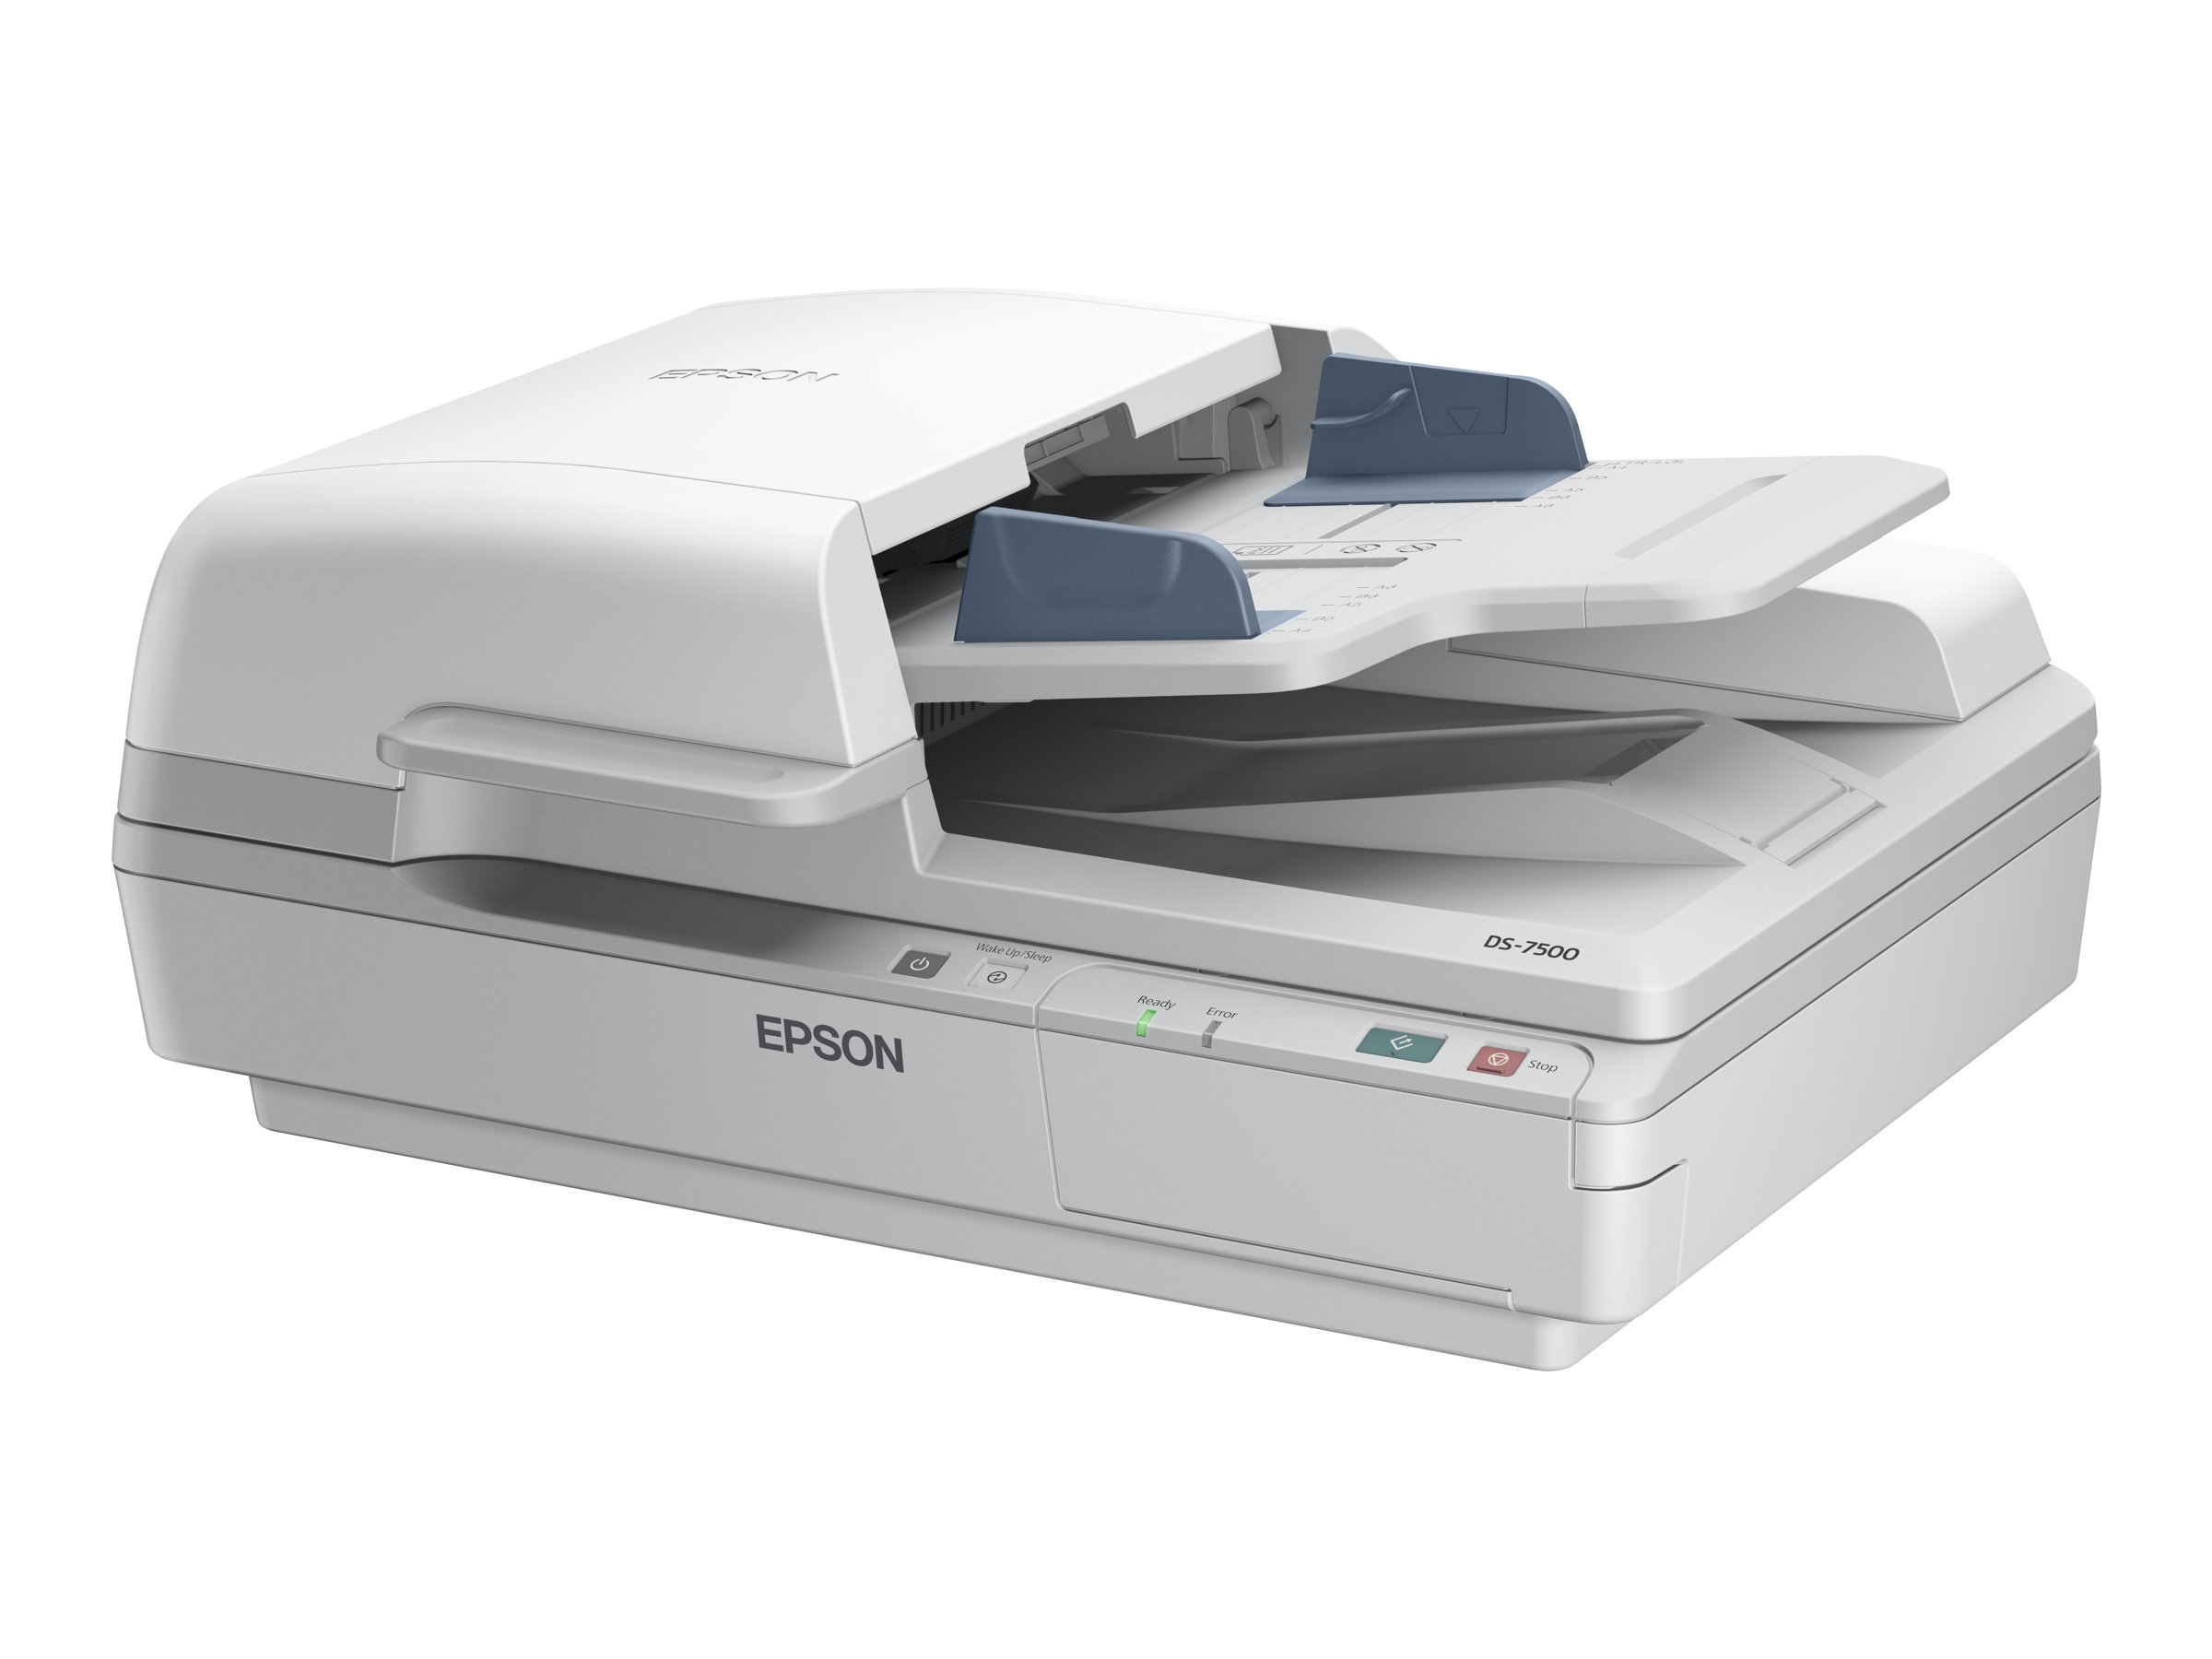 Epson WorkForce DS-6500 - scanner de documents A4 - 1200 ppp x 1200 ppp - 25ppm